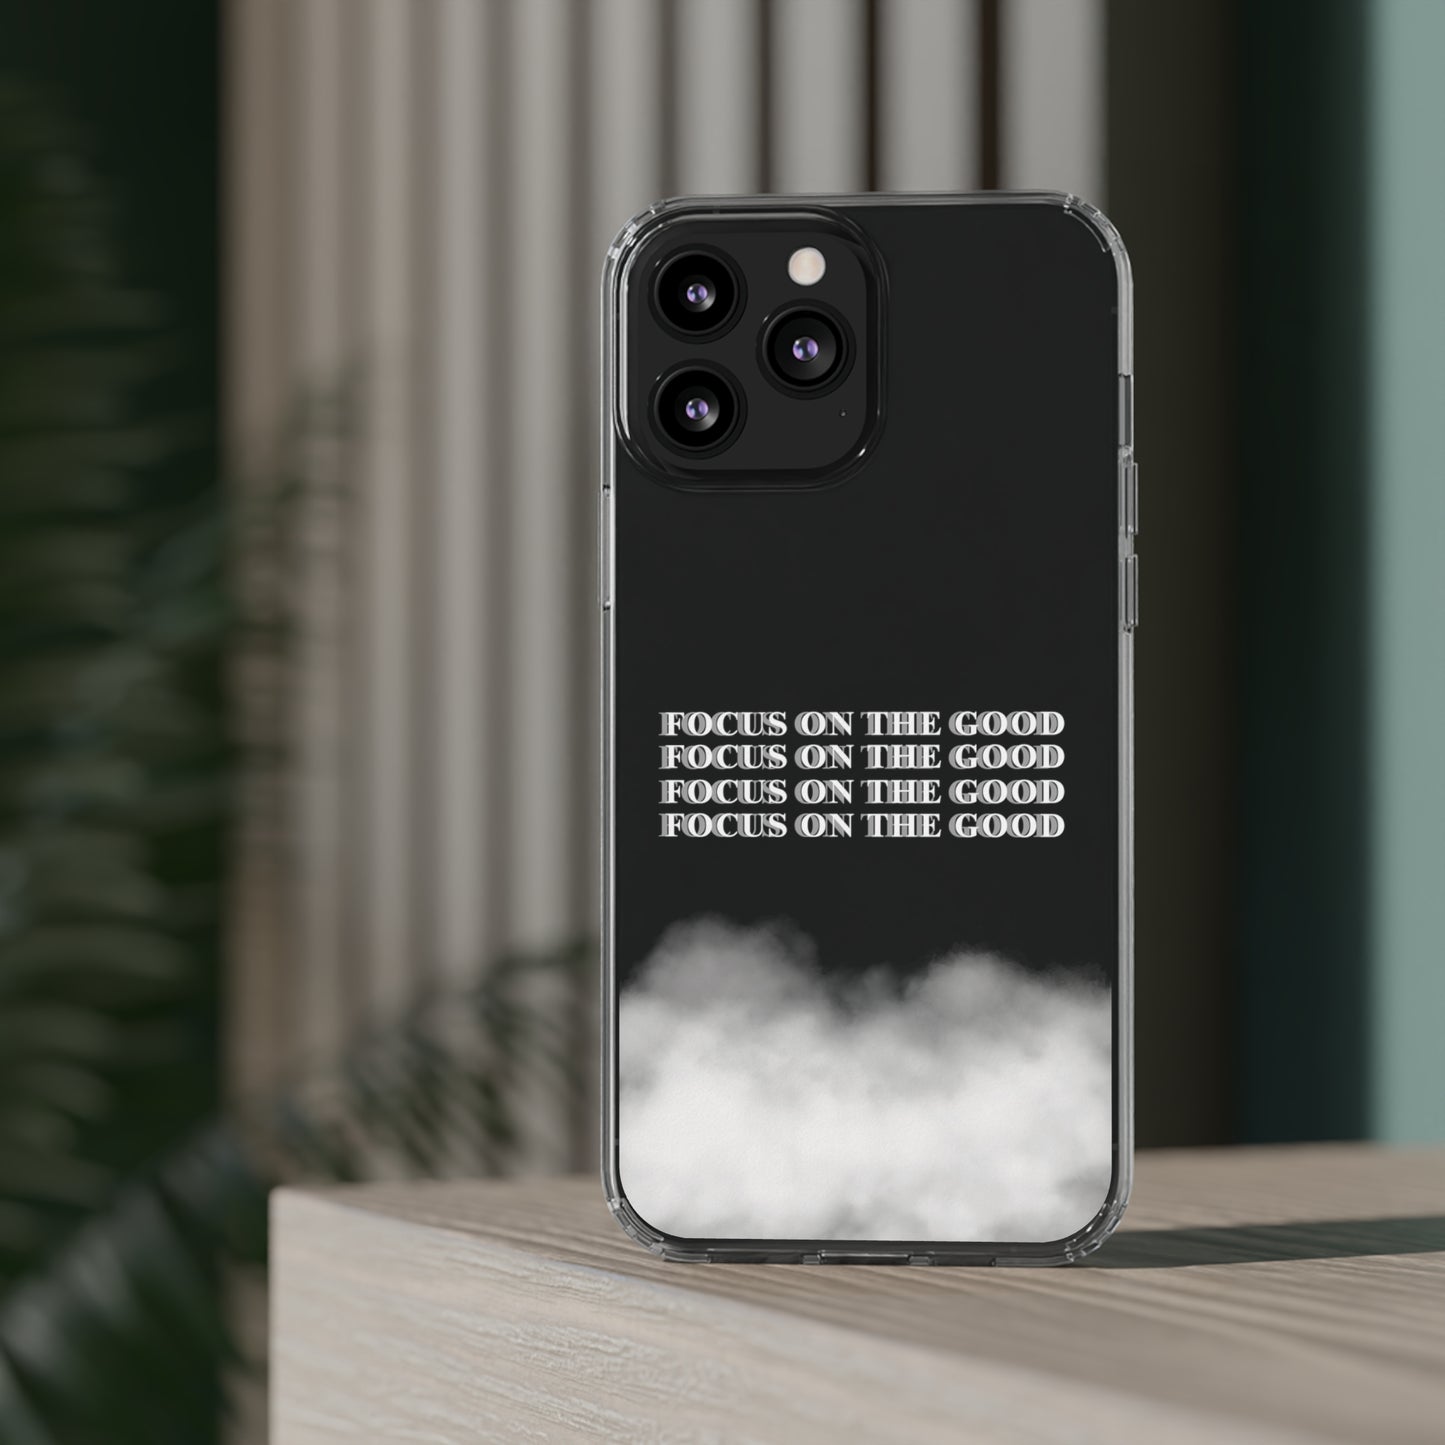 Focus On The Good iPhone Case